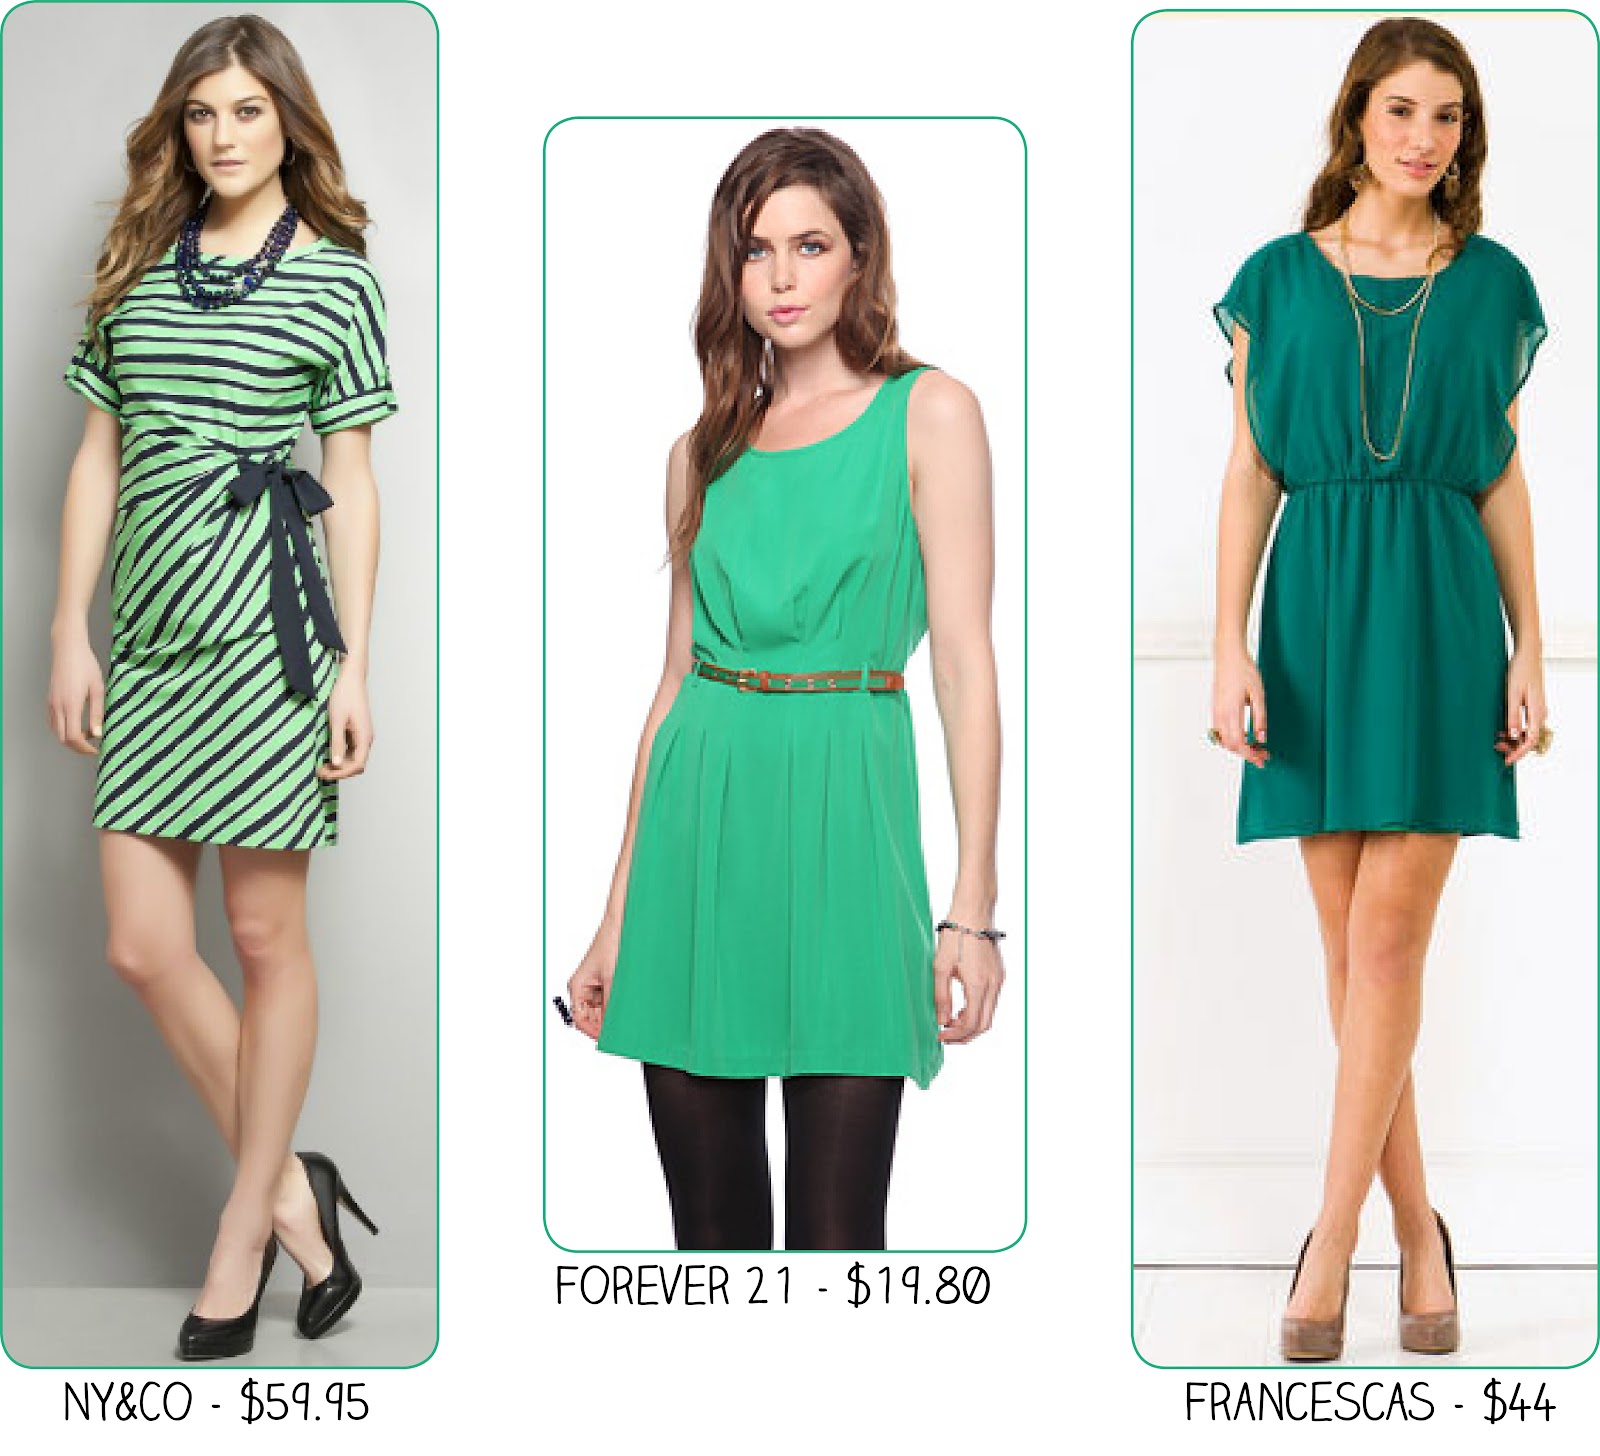 The Bargain Blonde: Five for Friday: St. Patrick's Day Inspired